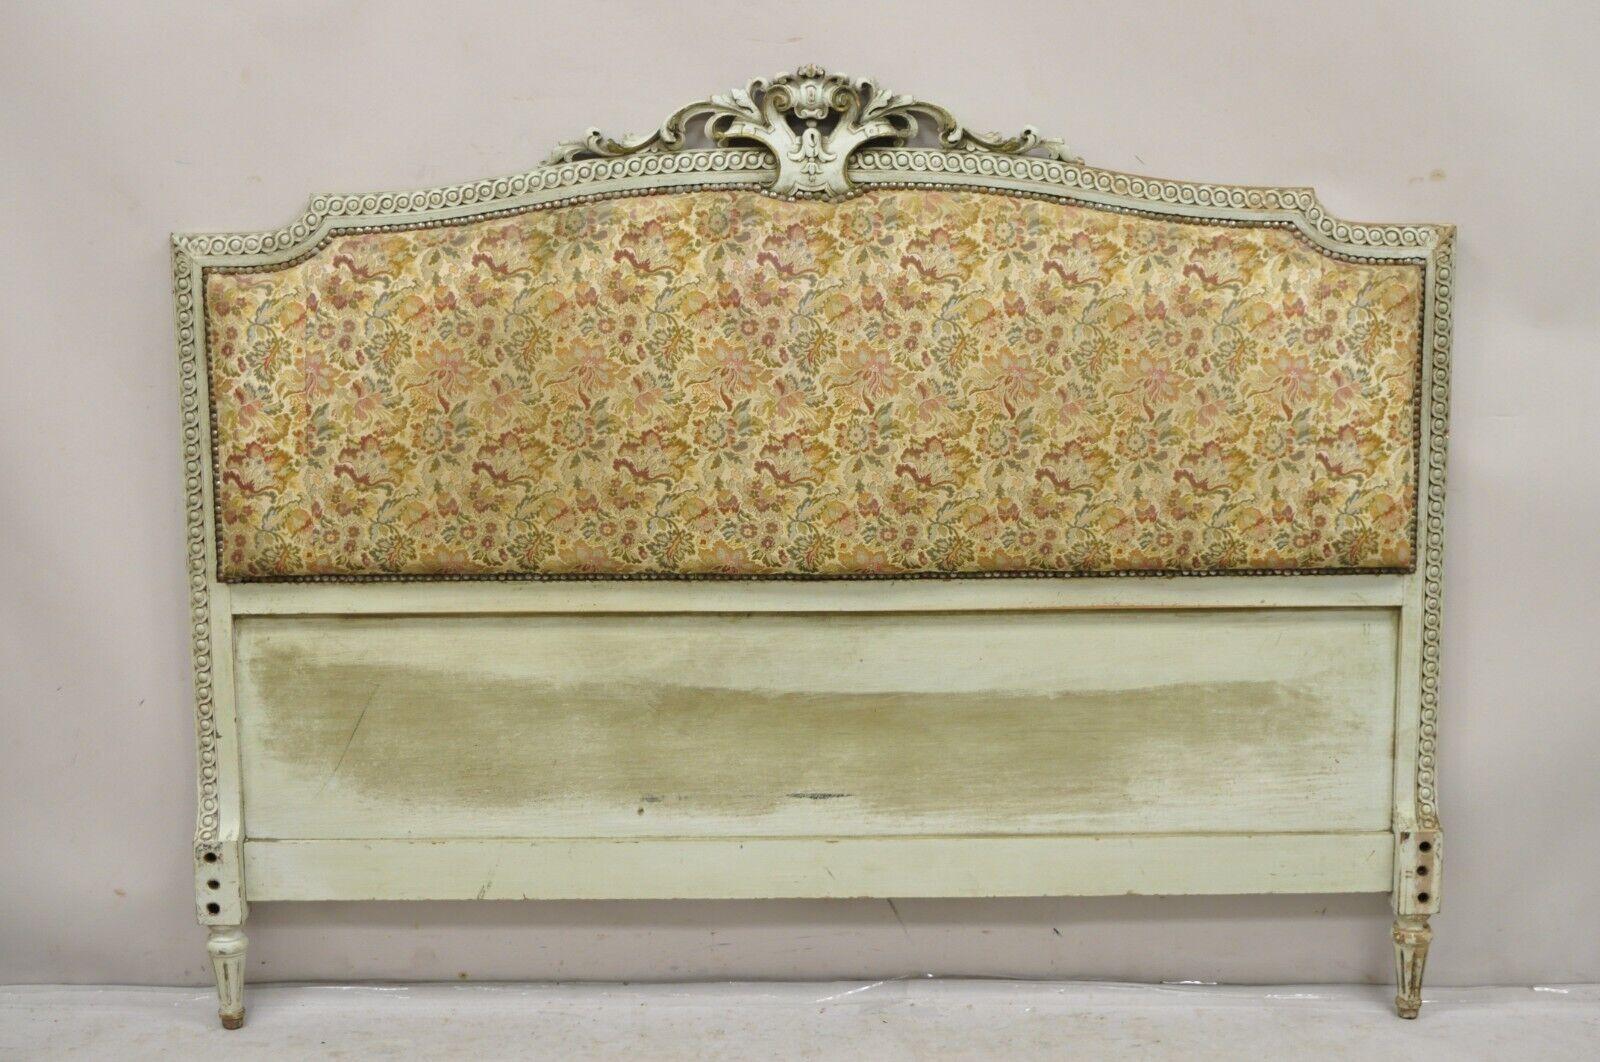 Antique French Louis XVI Style Distressed Mint Green Painted Queen Size Upholstered Bed Headboard. Circa Early 20th Century
Measurements: 49